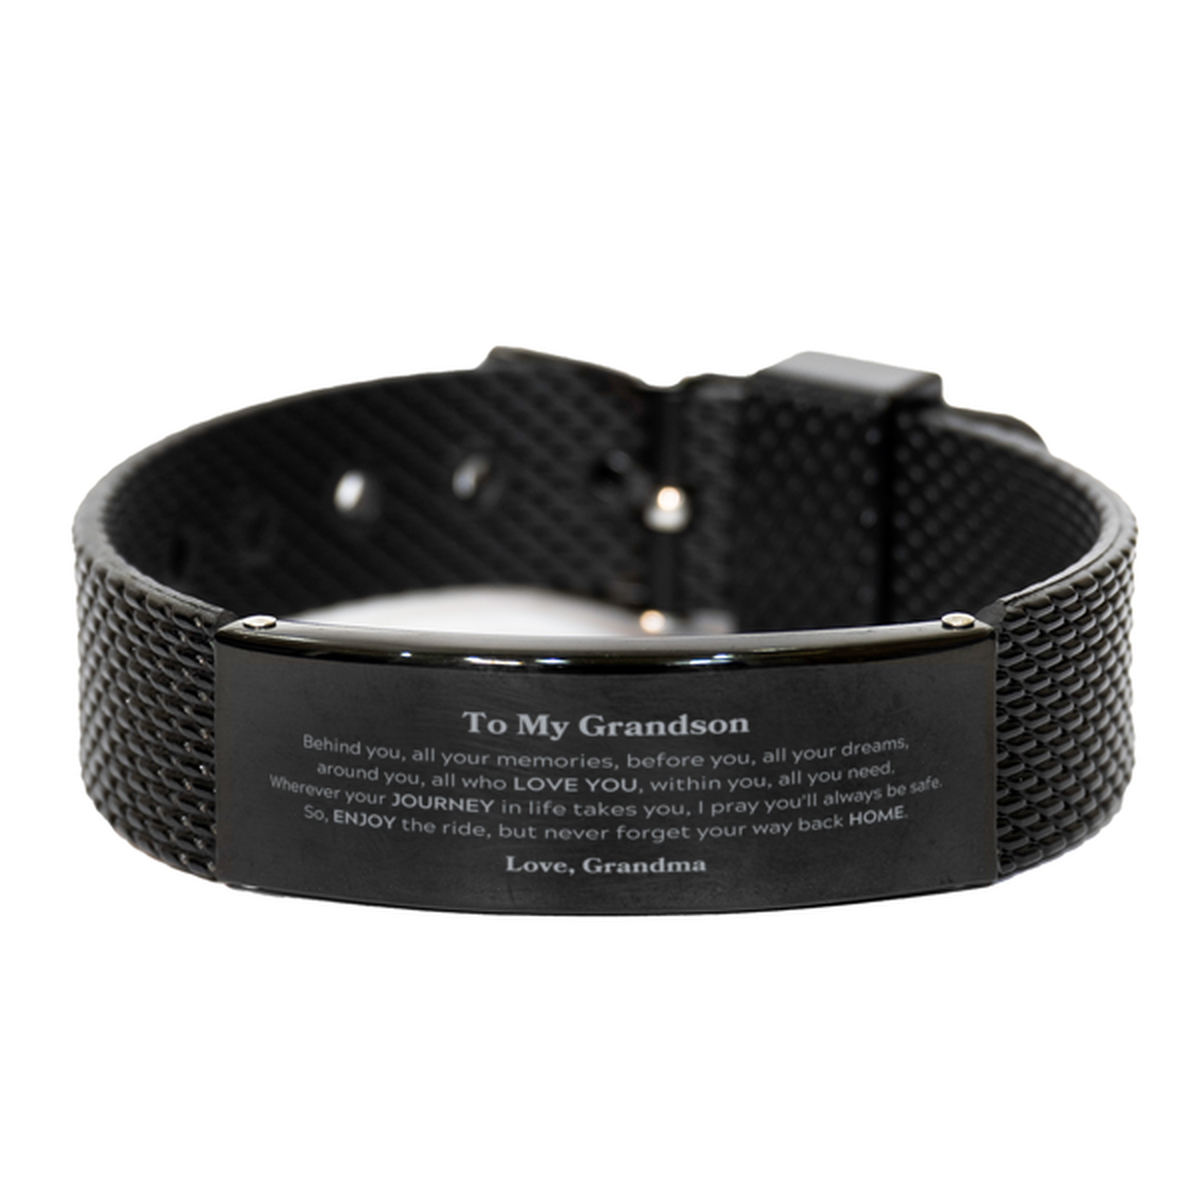 To My Grandson Graduation Gifts from Grandma, Grandson Black Shark Mesh Bracelet Christmas Birthday Gifts for Grandson Behind you, all your memories, before you, all your dreams. Love, Grandma